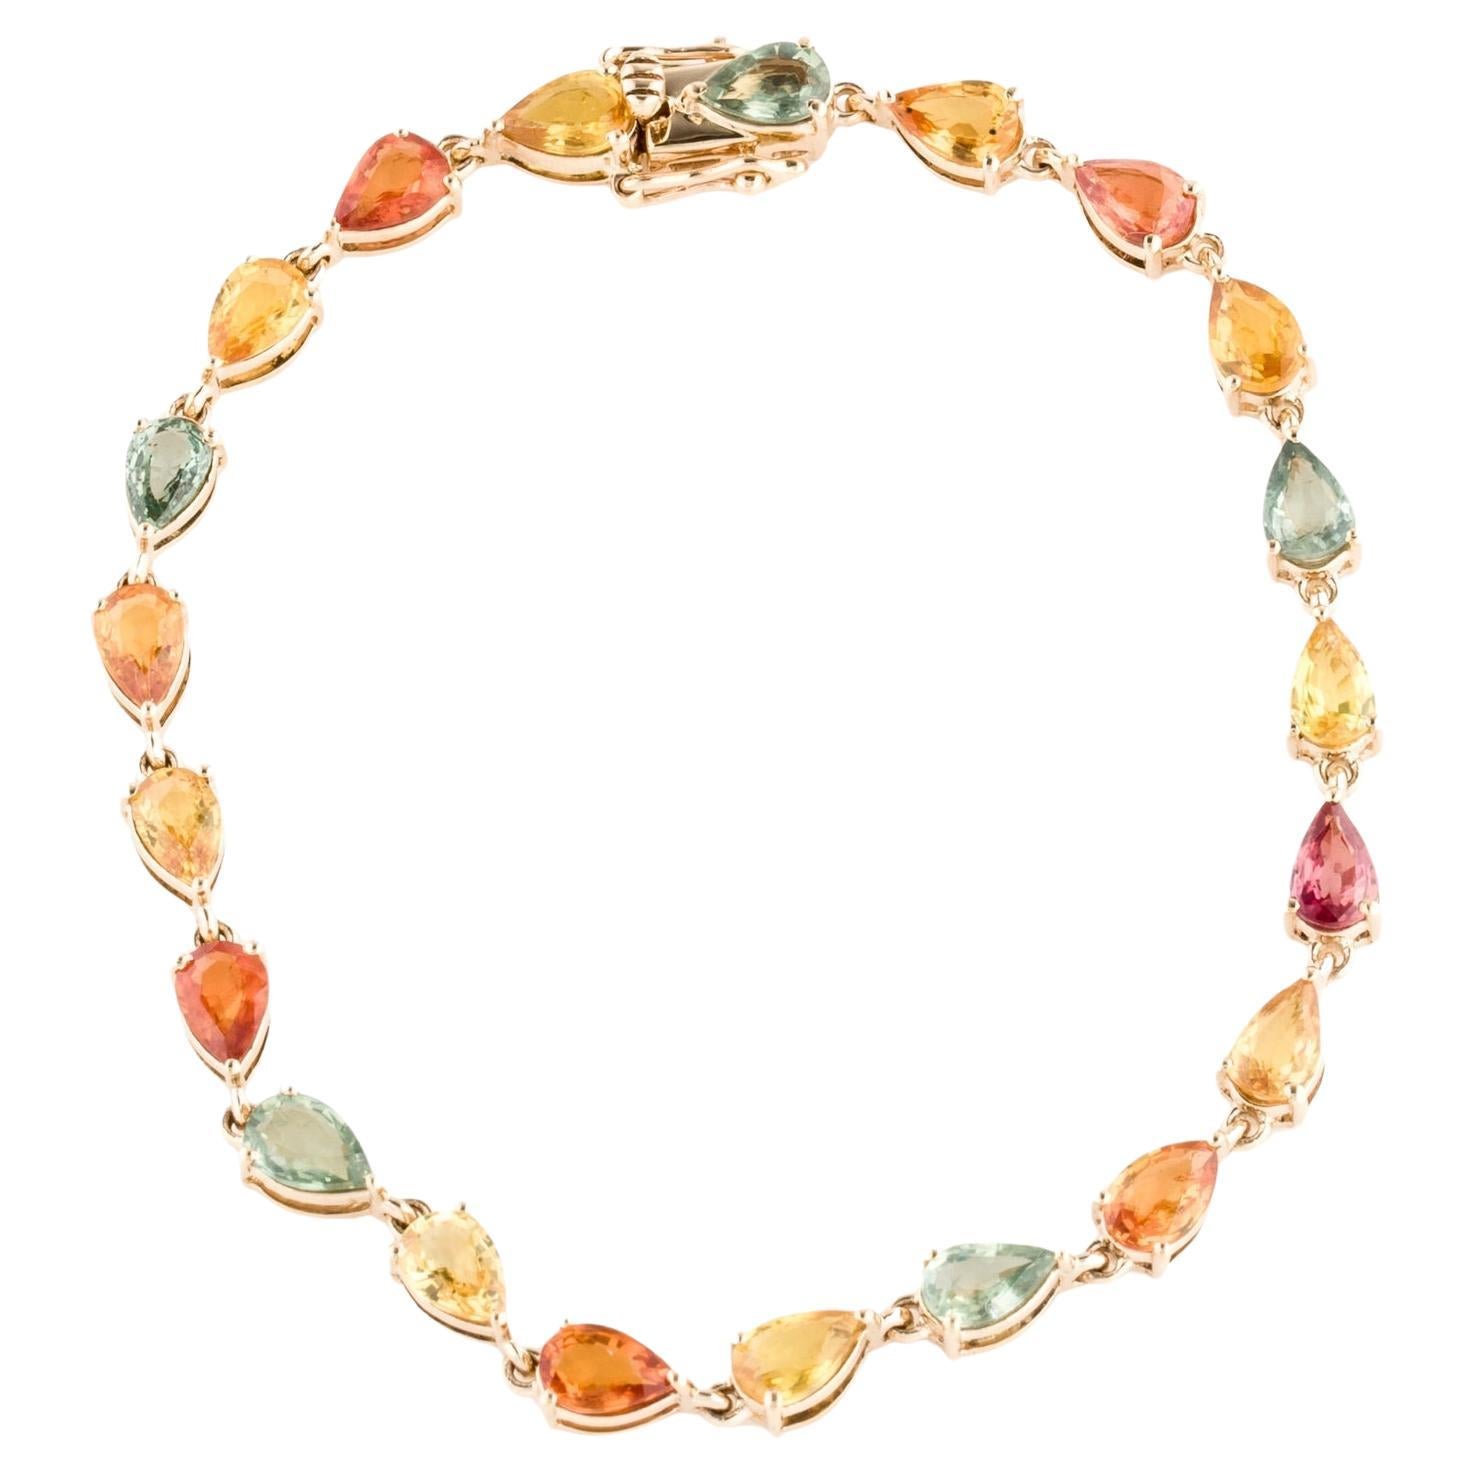 14K Yellow Gold Sapphire Link Bracelet, 9.90ct Multi-Colored Sapphires For Sale